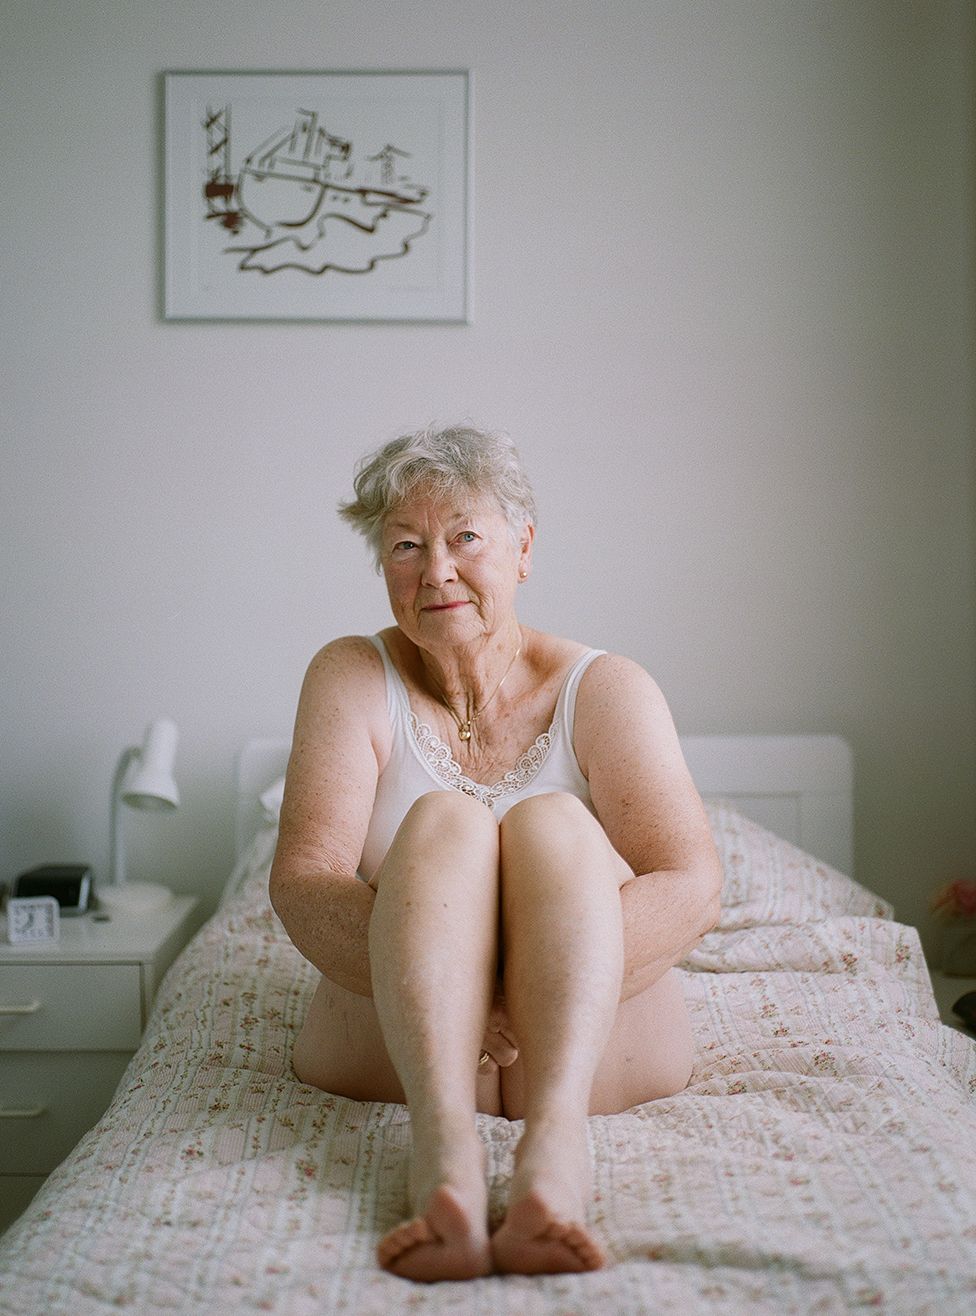 An elderly lady sits on a bed in her underwear